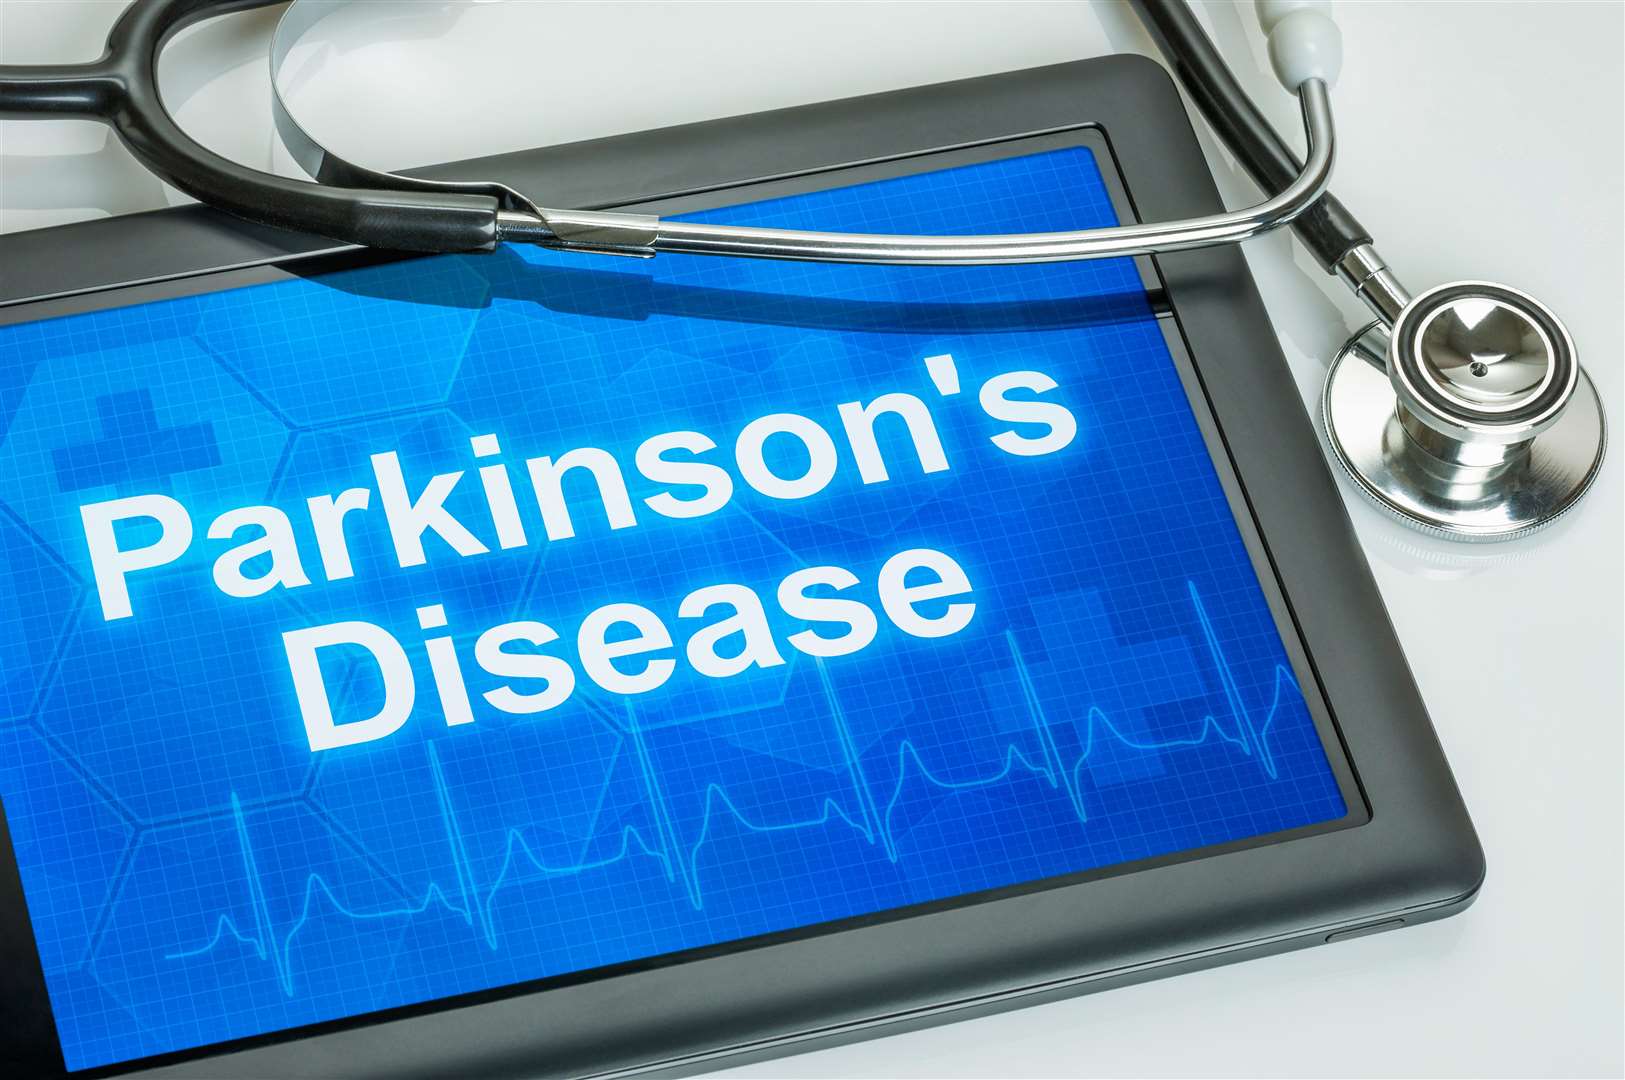 Inverness has been added to the list of Walk for Parkinson's events for 2023.